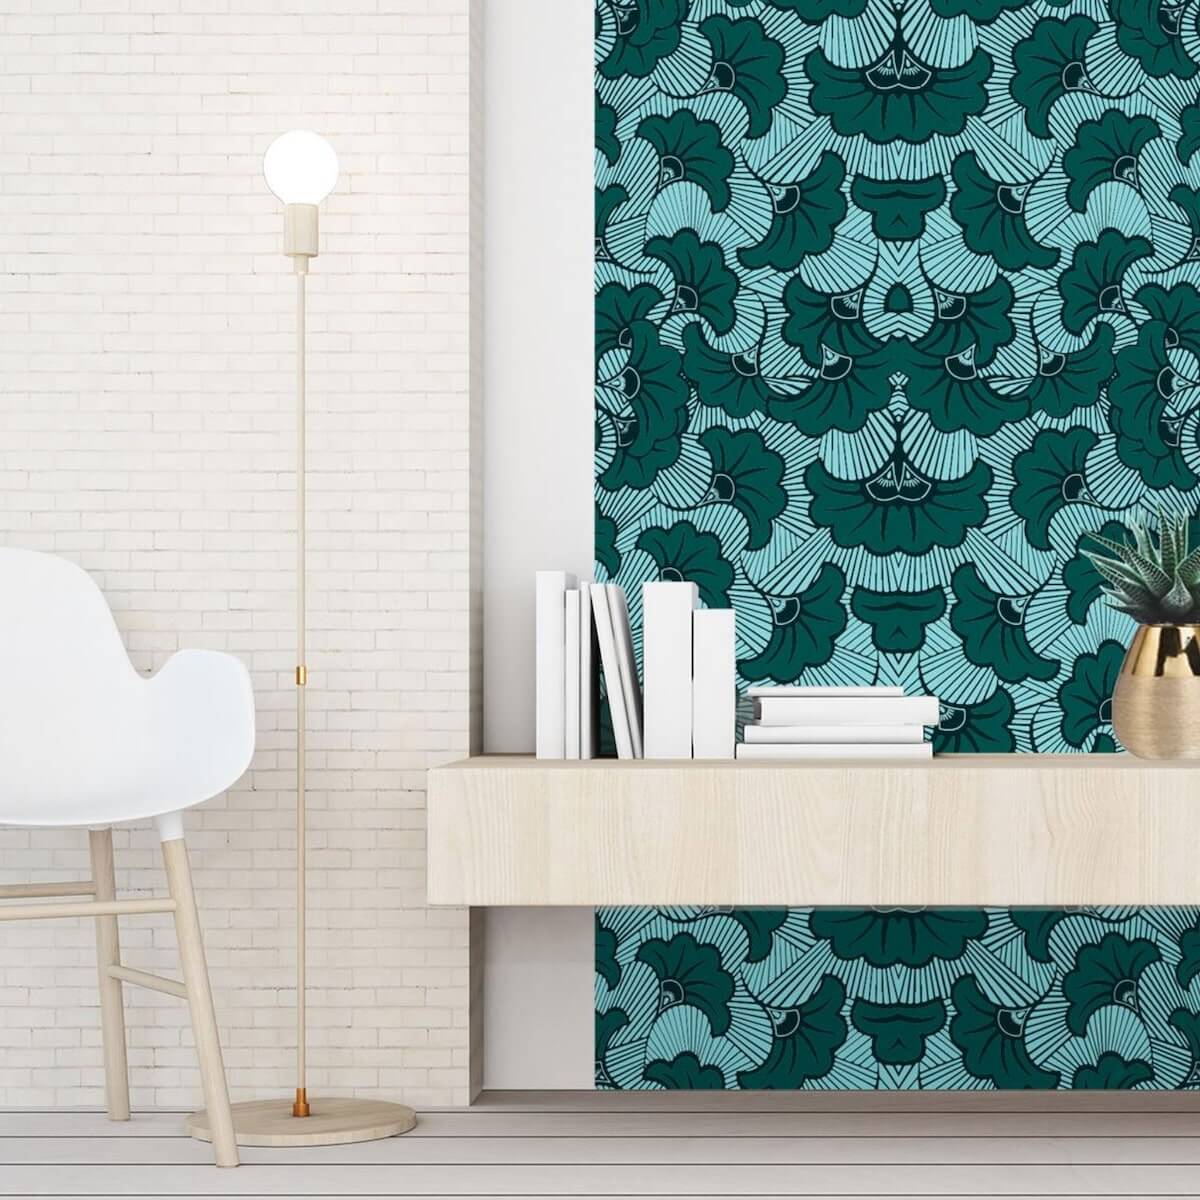 An original wall covering with wallpaper (1)